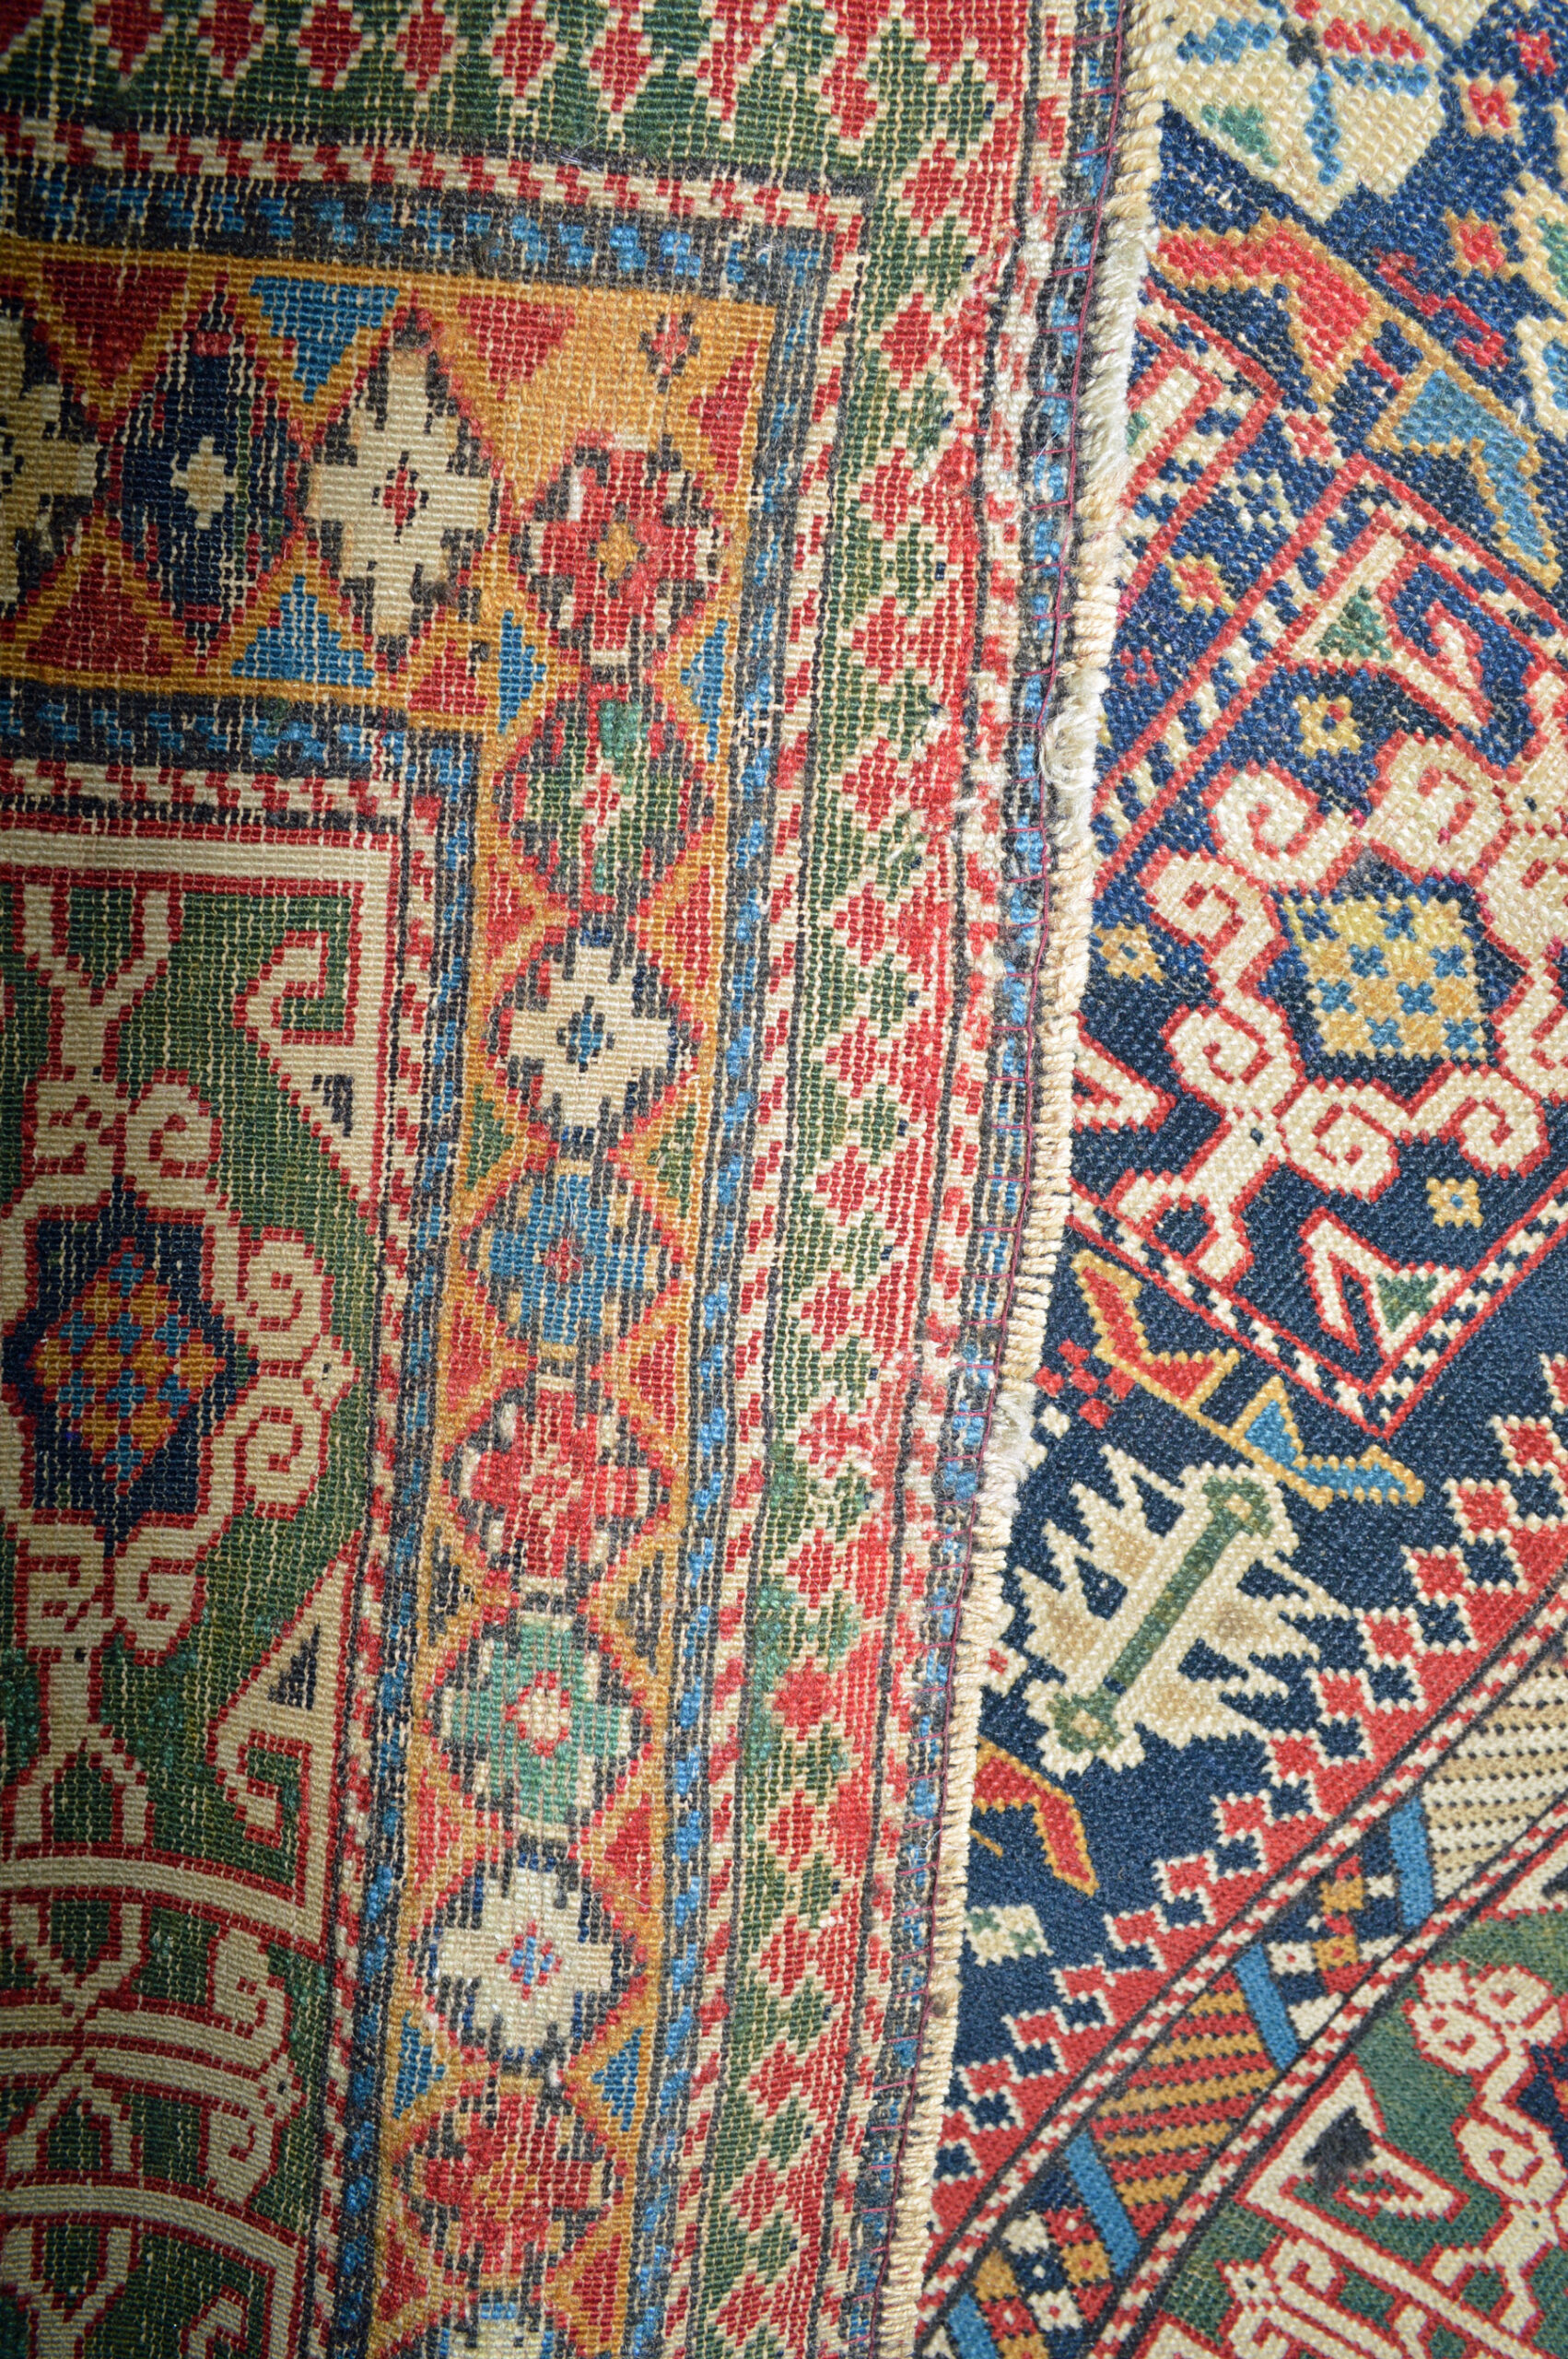 Weave detail from an antique Shirvan rug, northeast Caucasus, circa 1880 - Douglas Stock Gallery, antique Oriental rugs Boston, antique rugs New England, antique rugs New York by appointment, antique Oriental rugs Washington DC, antique rugs Houston, antique rugs Florida, antique rugs Los Angeles